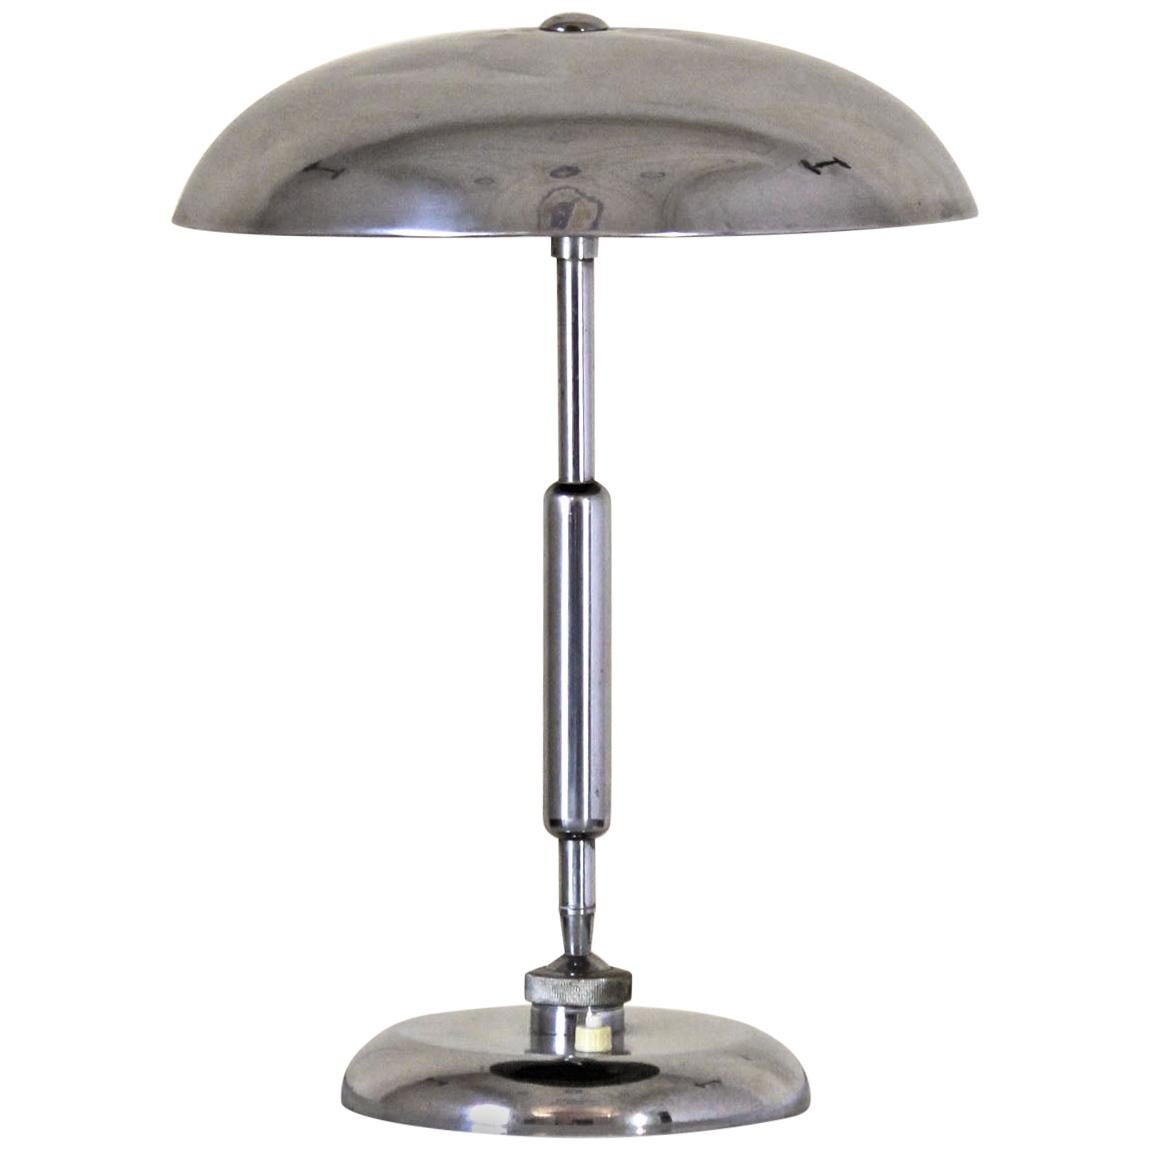 1950s Vintage Flexible Table, Desk Lamp with Chromed Iron Structure by Torlasco